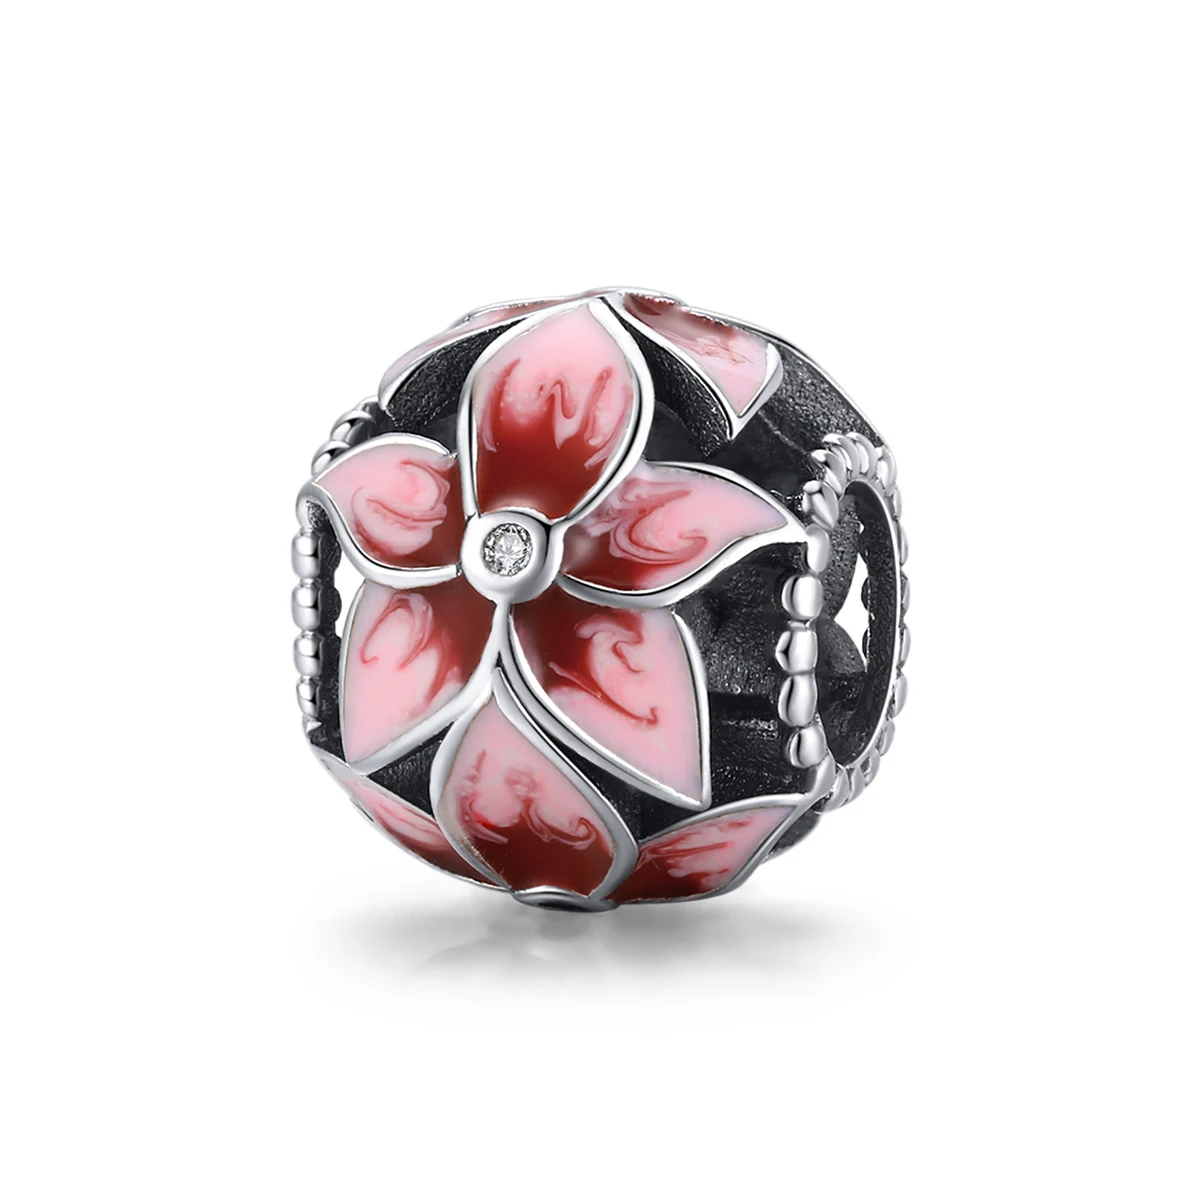 

New Type Jewelry 925 Sterling Silver Blooming Flowers Round Bead Charms Pendant Jewelry